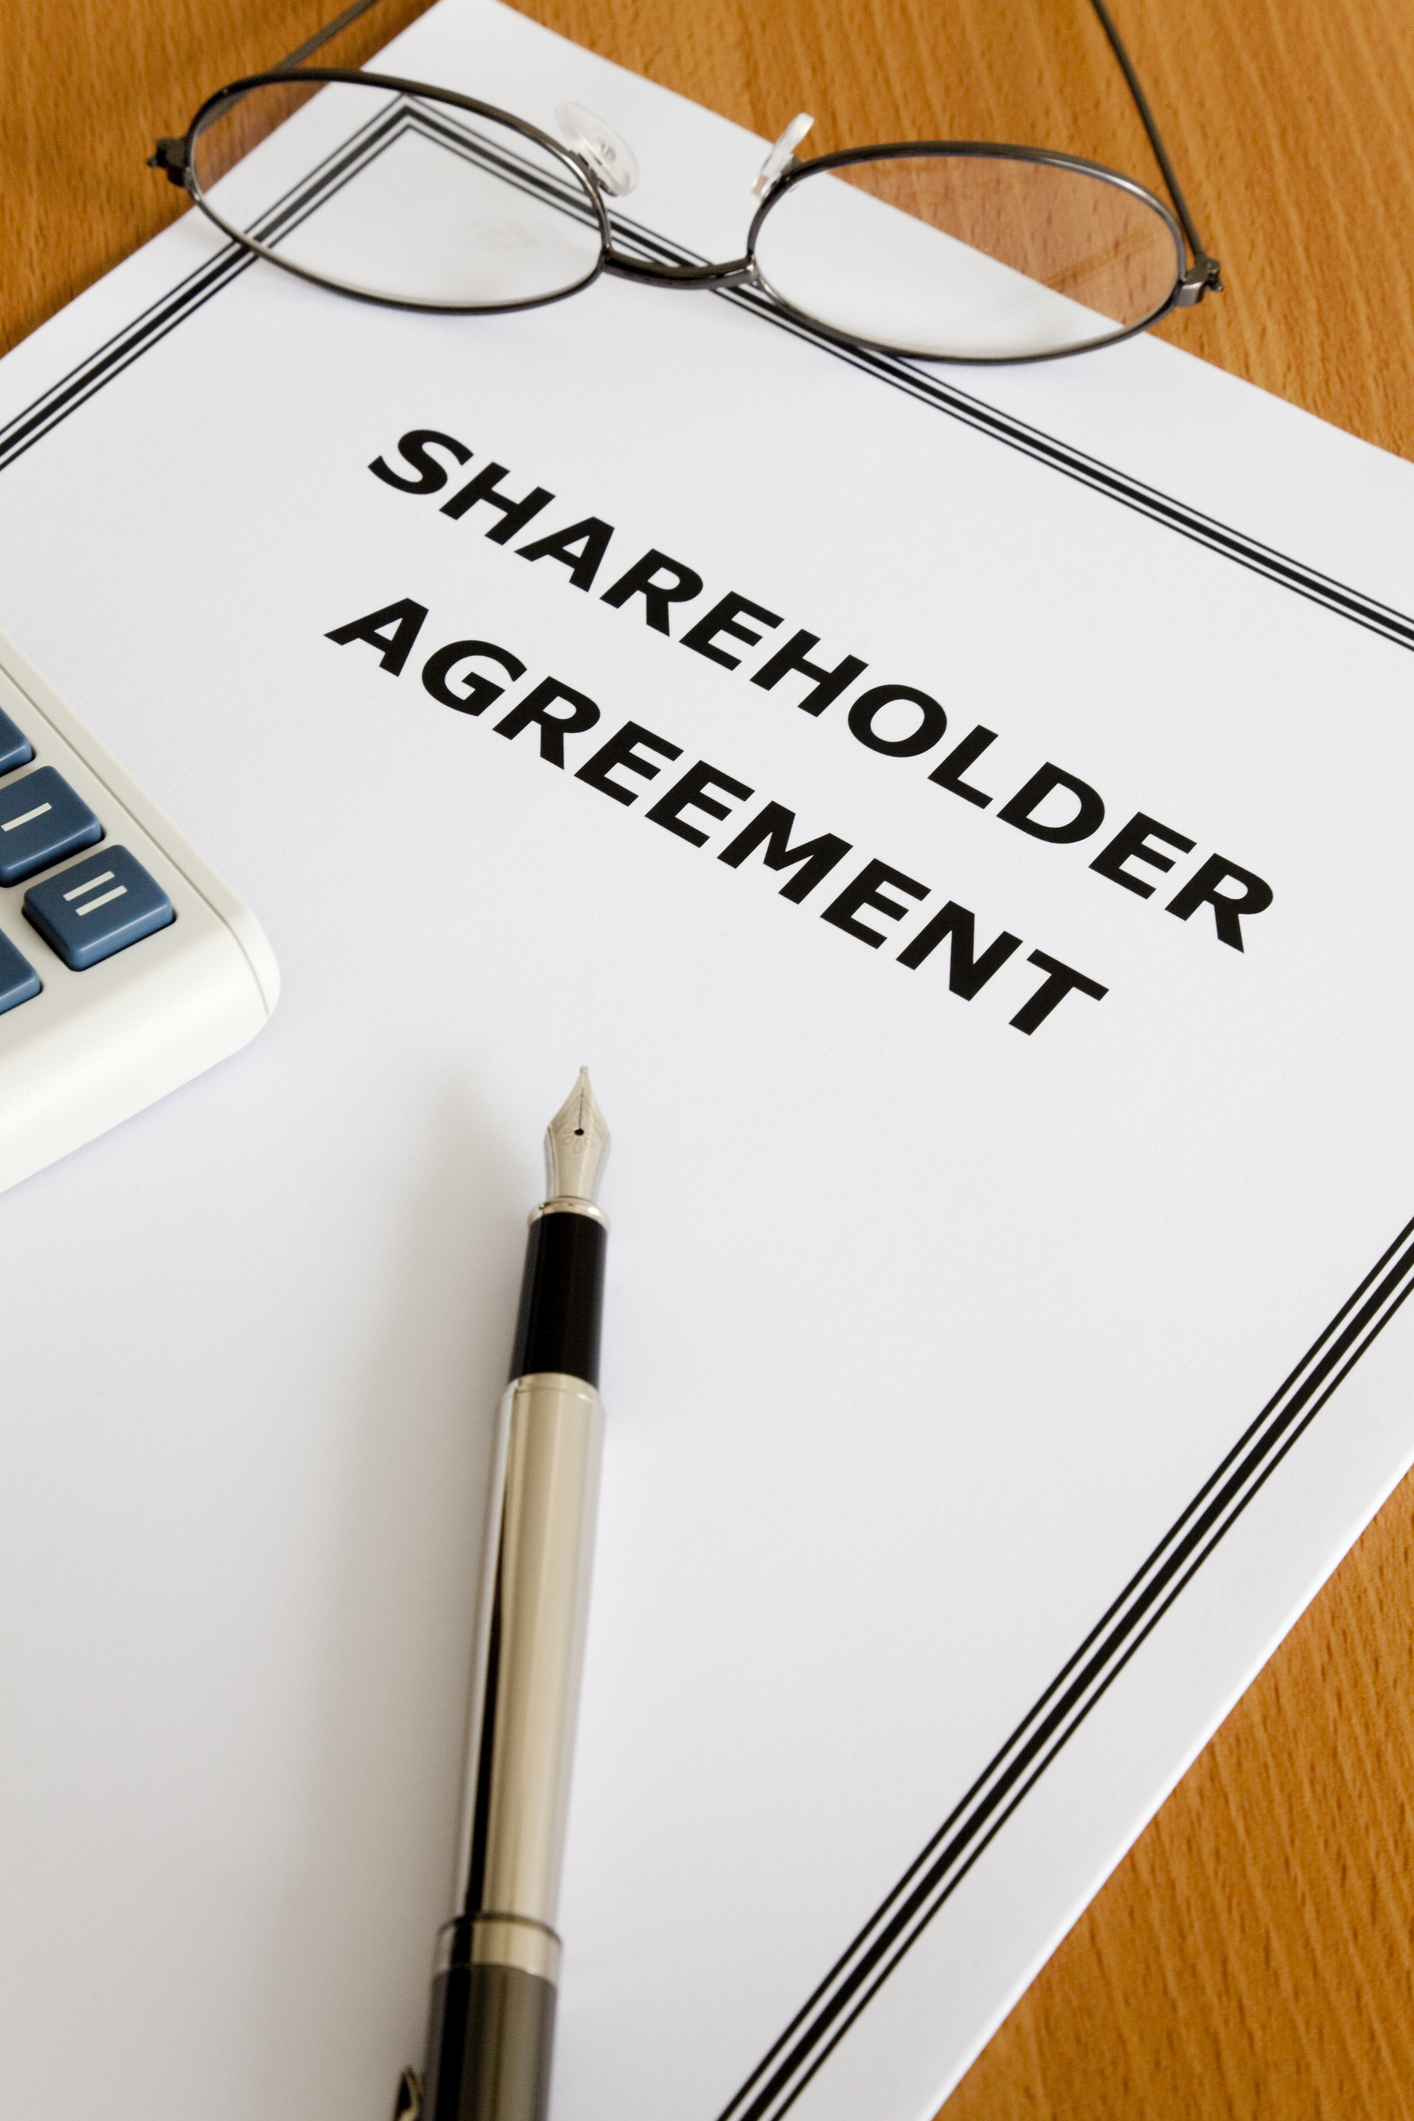 Minority Business Owners Are Not Always Bound by an Operating or Shareholder Agreement